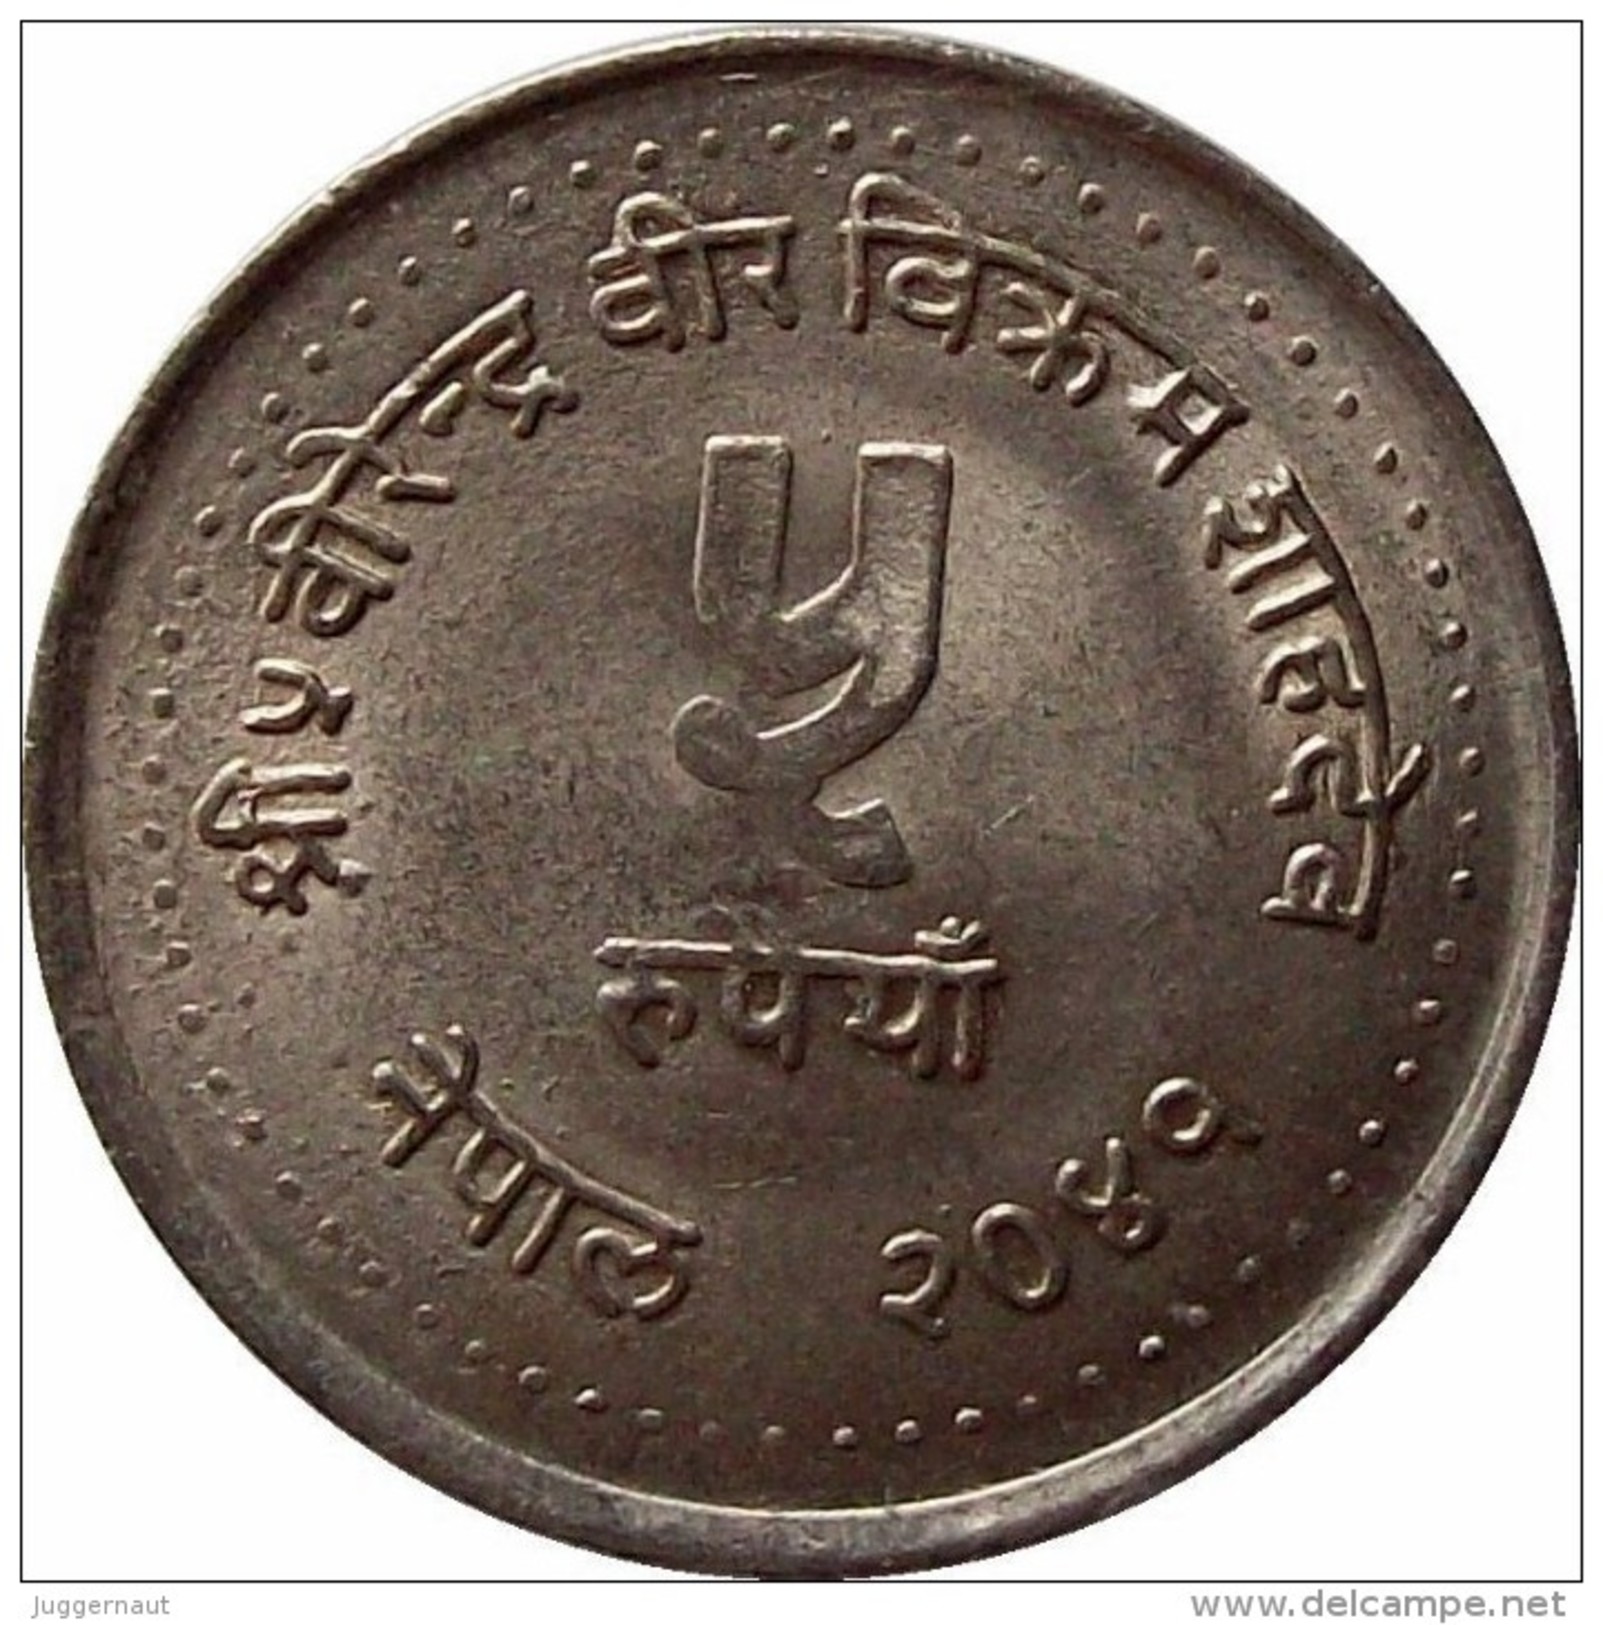 FAMILY PLANNING ASSOCIATION SILVER JUBILEE Rs.5 COMMEMORATIVE COIN NEPAL 1984 KM-1017 UNCIRCULATED UNC - Népal